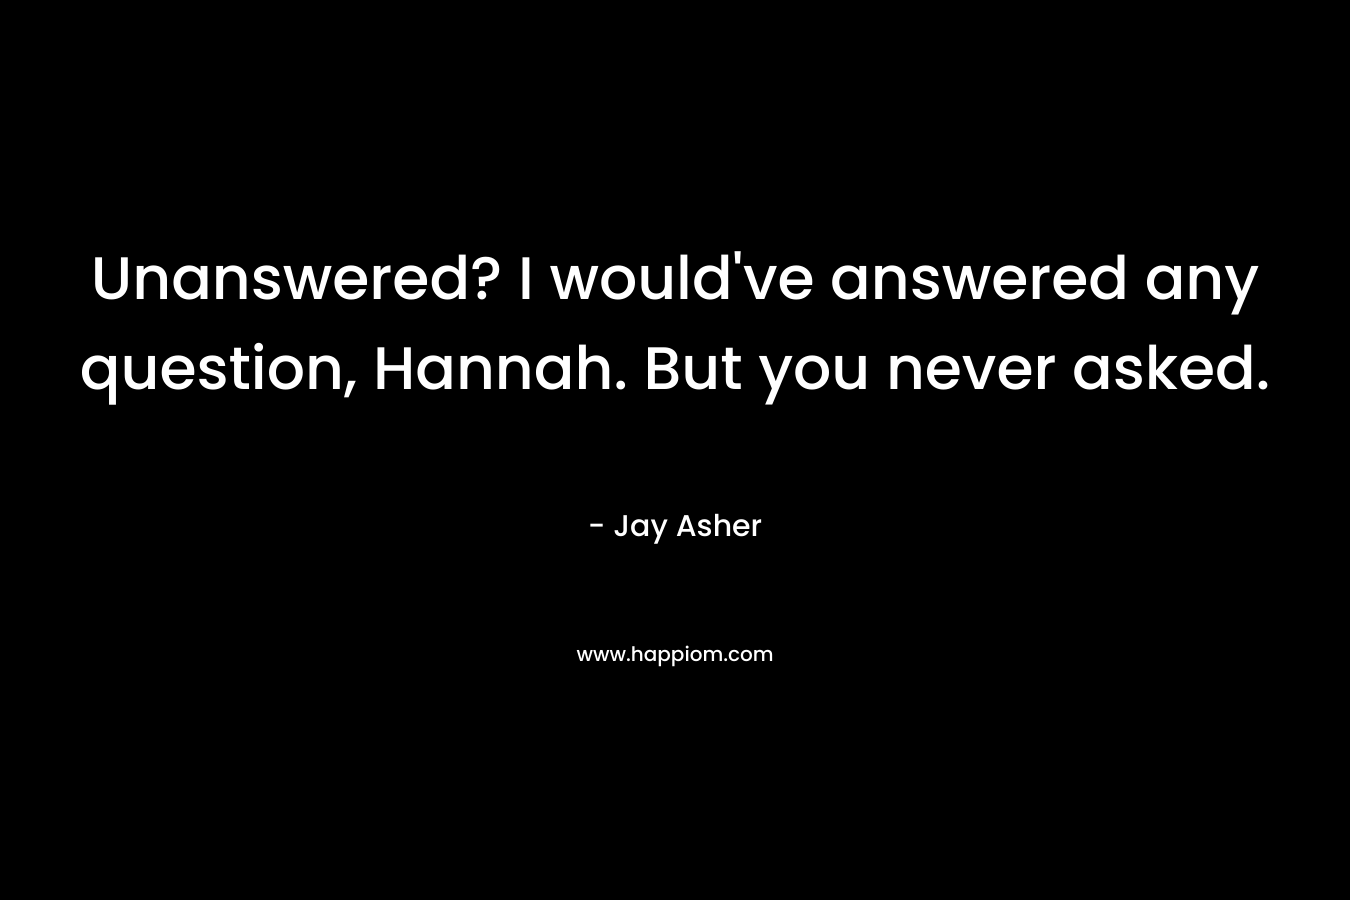 Unanswered? I would've answered any question, Hannah. But you never asked.